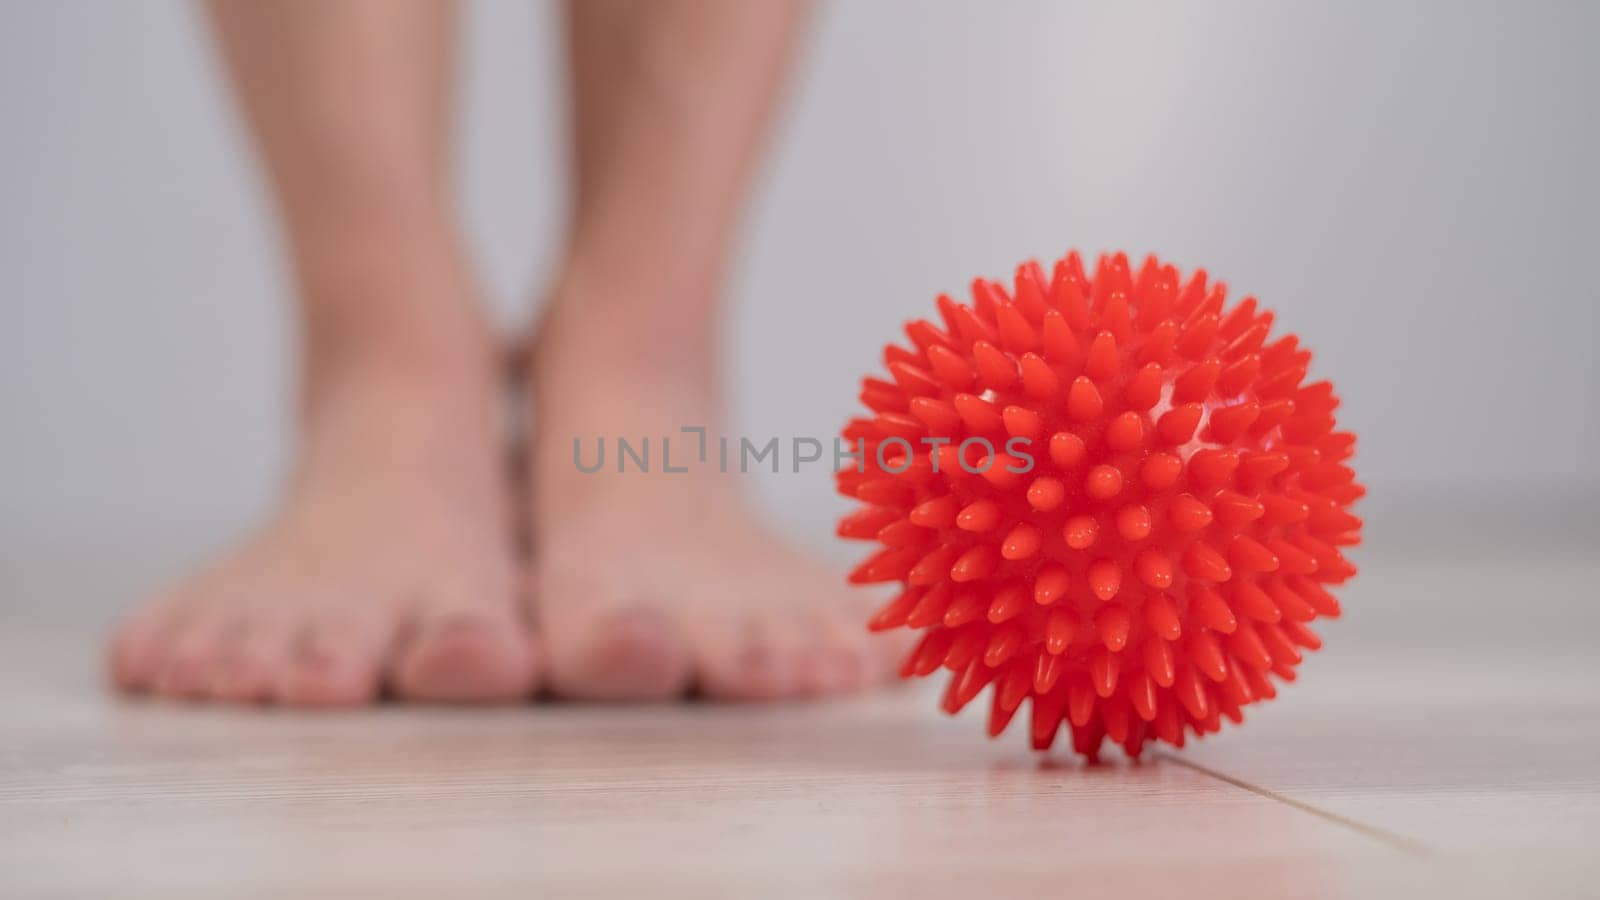 Close-up of a woman's foot on a massage ball with spikes